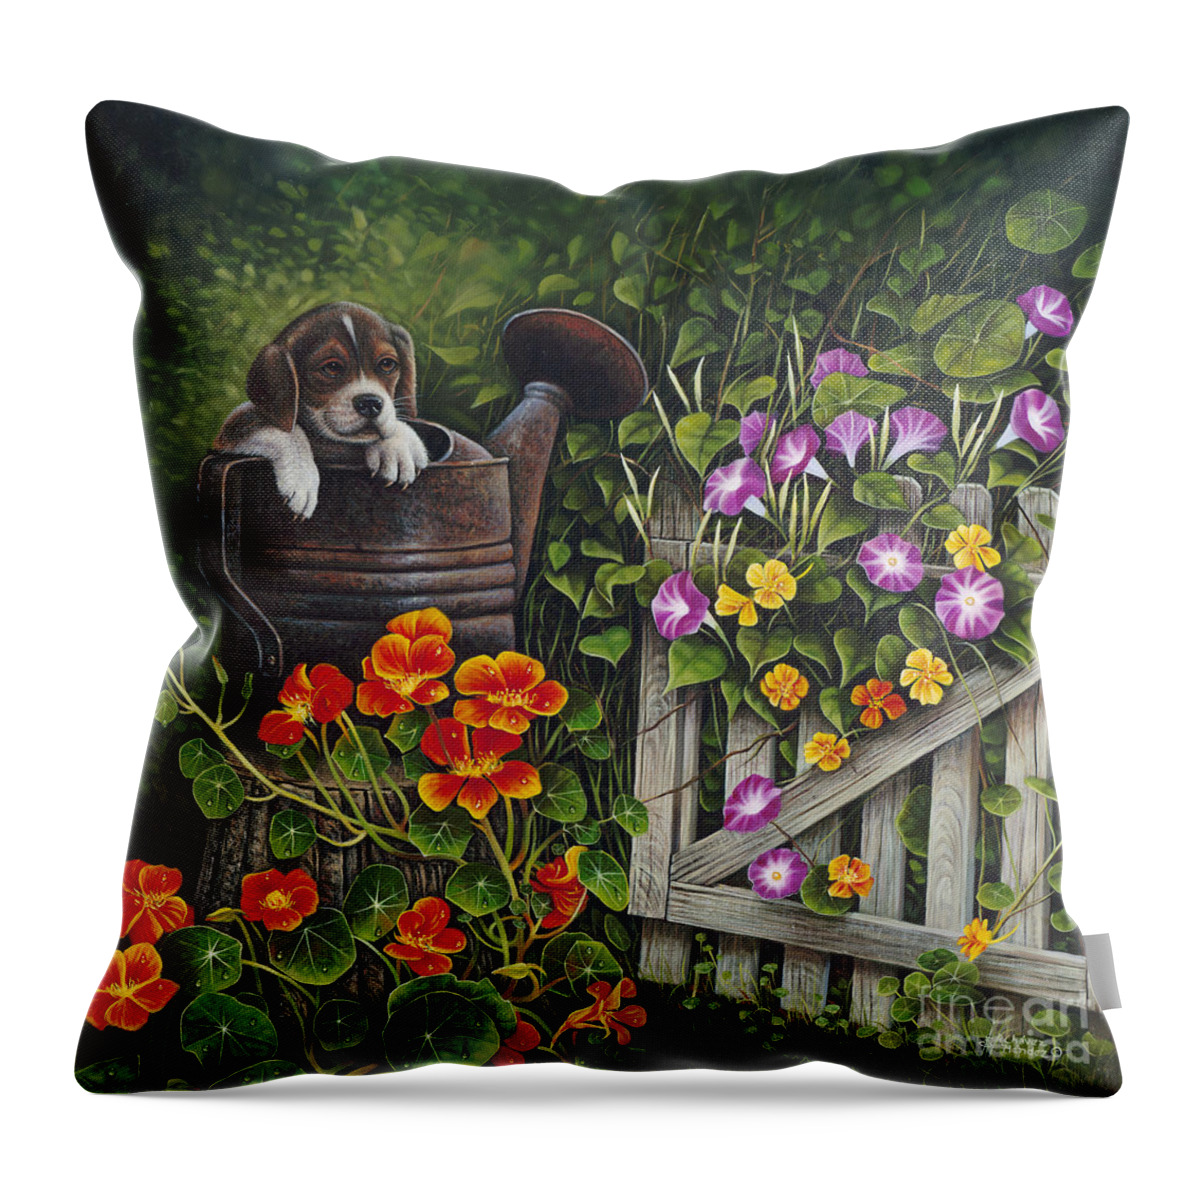 Puppy Throw Pillow featuring the painting Snout N Spout by Ricardo Chavez-Mendez